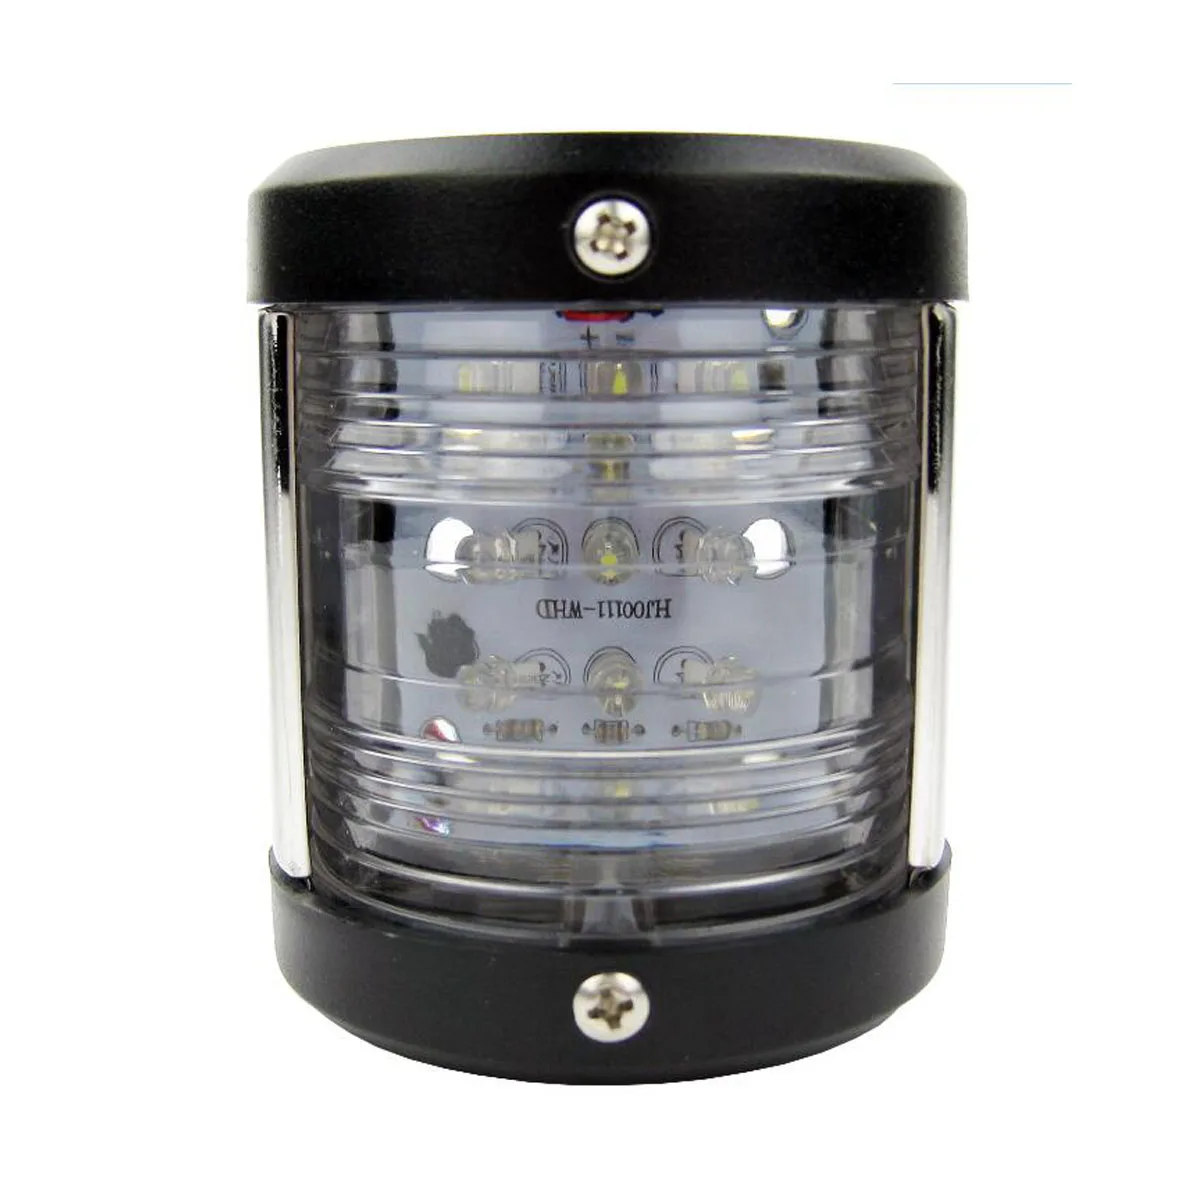 Boat Black Plastic 12V LED/Tungsten Low Side Lamp 225 Degree Waterproof Masthead and Stern Navigation White Light 10x oven light cooker microwave bulb ses e14 25w high temperature 300degree lamp vintage edison tungsten light bulb bread machin